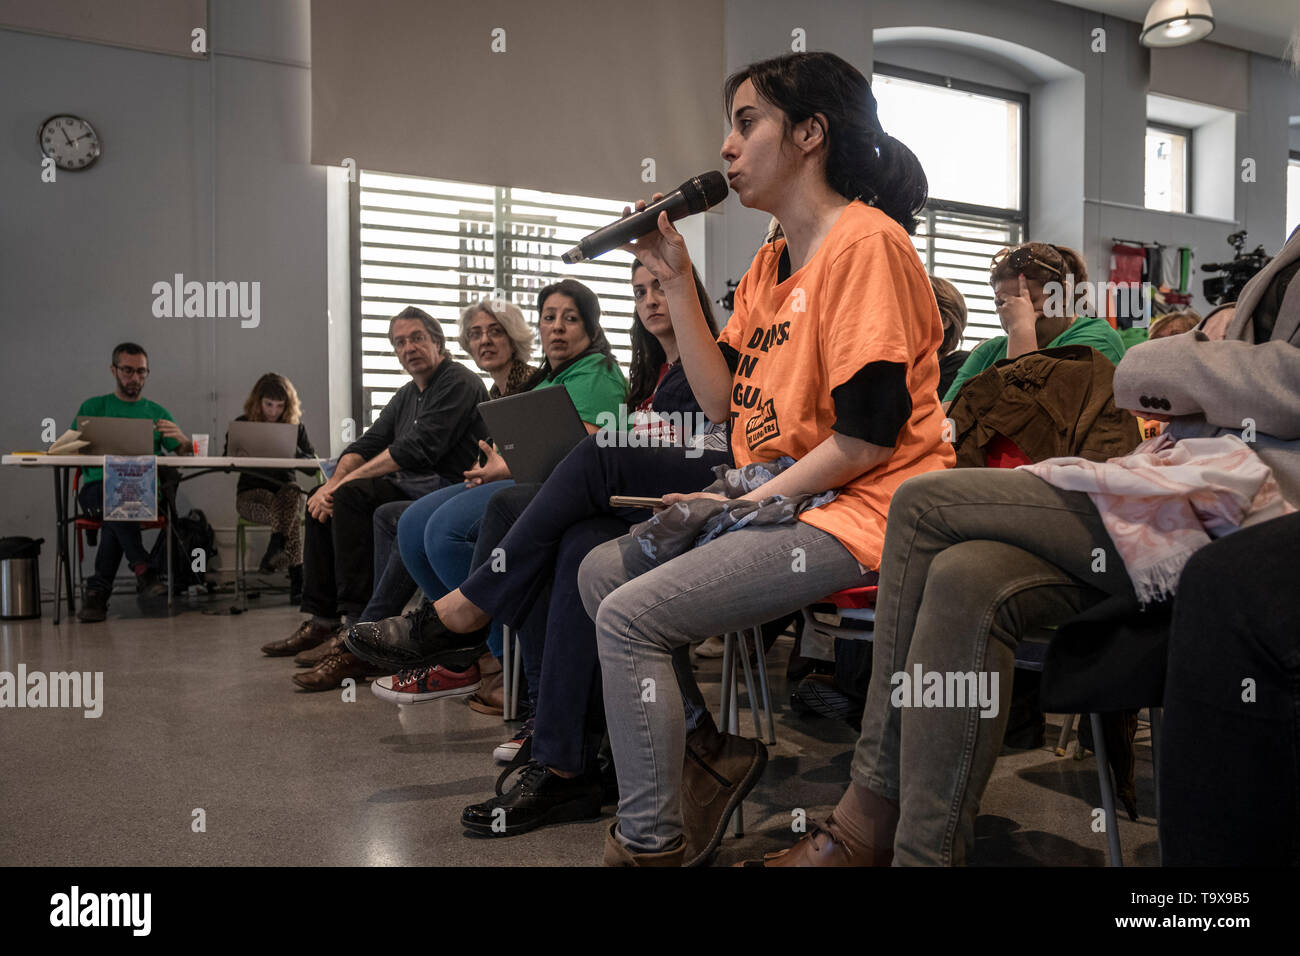 A member of the Tenants' Union, is seen asking a question during the debate. The candidates for Barcelona City Council debated on housing and the model of the city, the debate was organized by various social entities. The candidates answered very specific questions about the right to housing and the city model formulated by members of the main social entities. Stock Photo